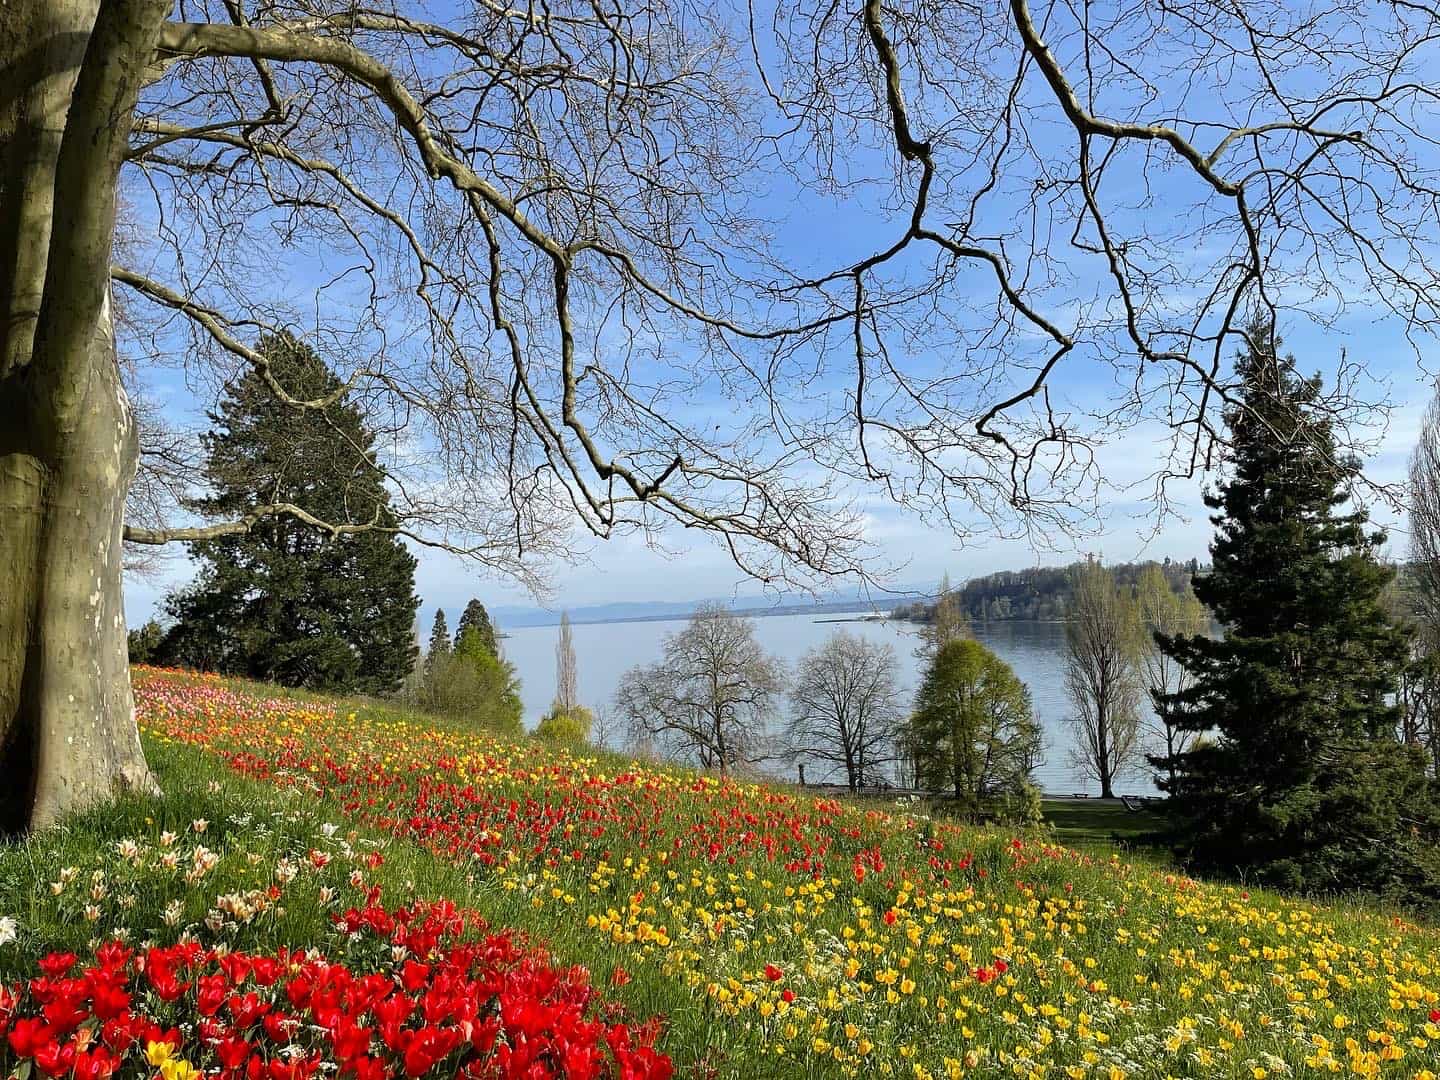 Best things to do in Konstanz Germany - Jean and Patti - Beautiful field of flowers overlooking the lake